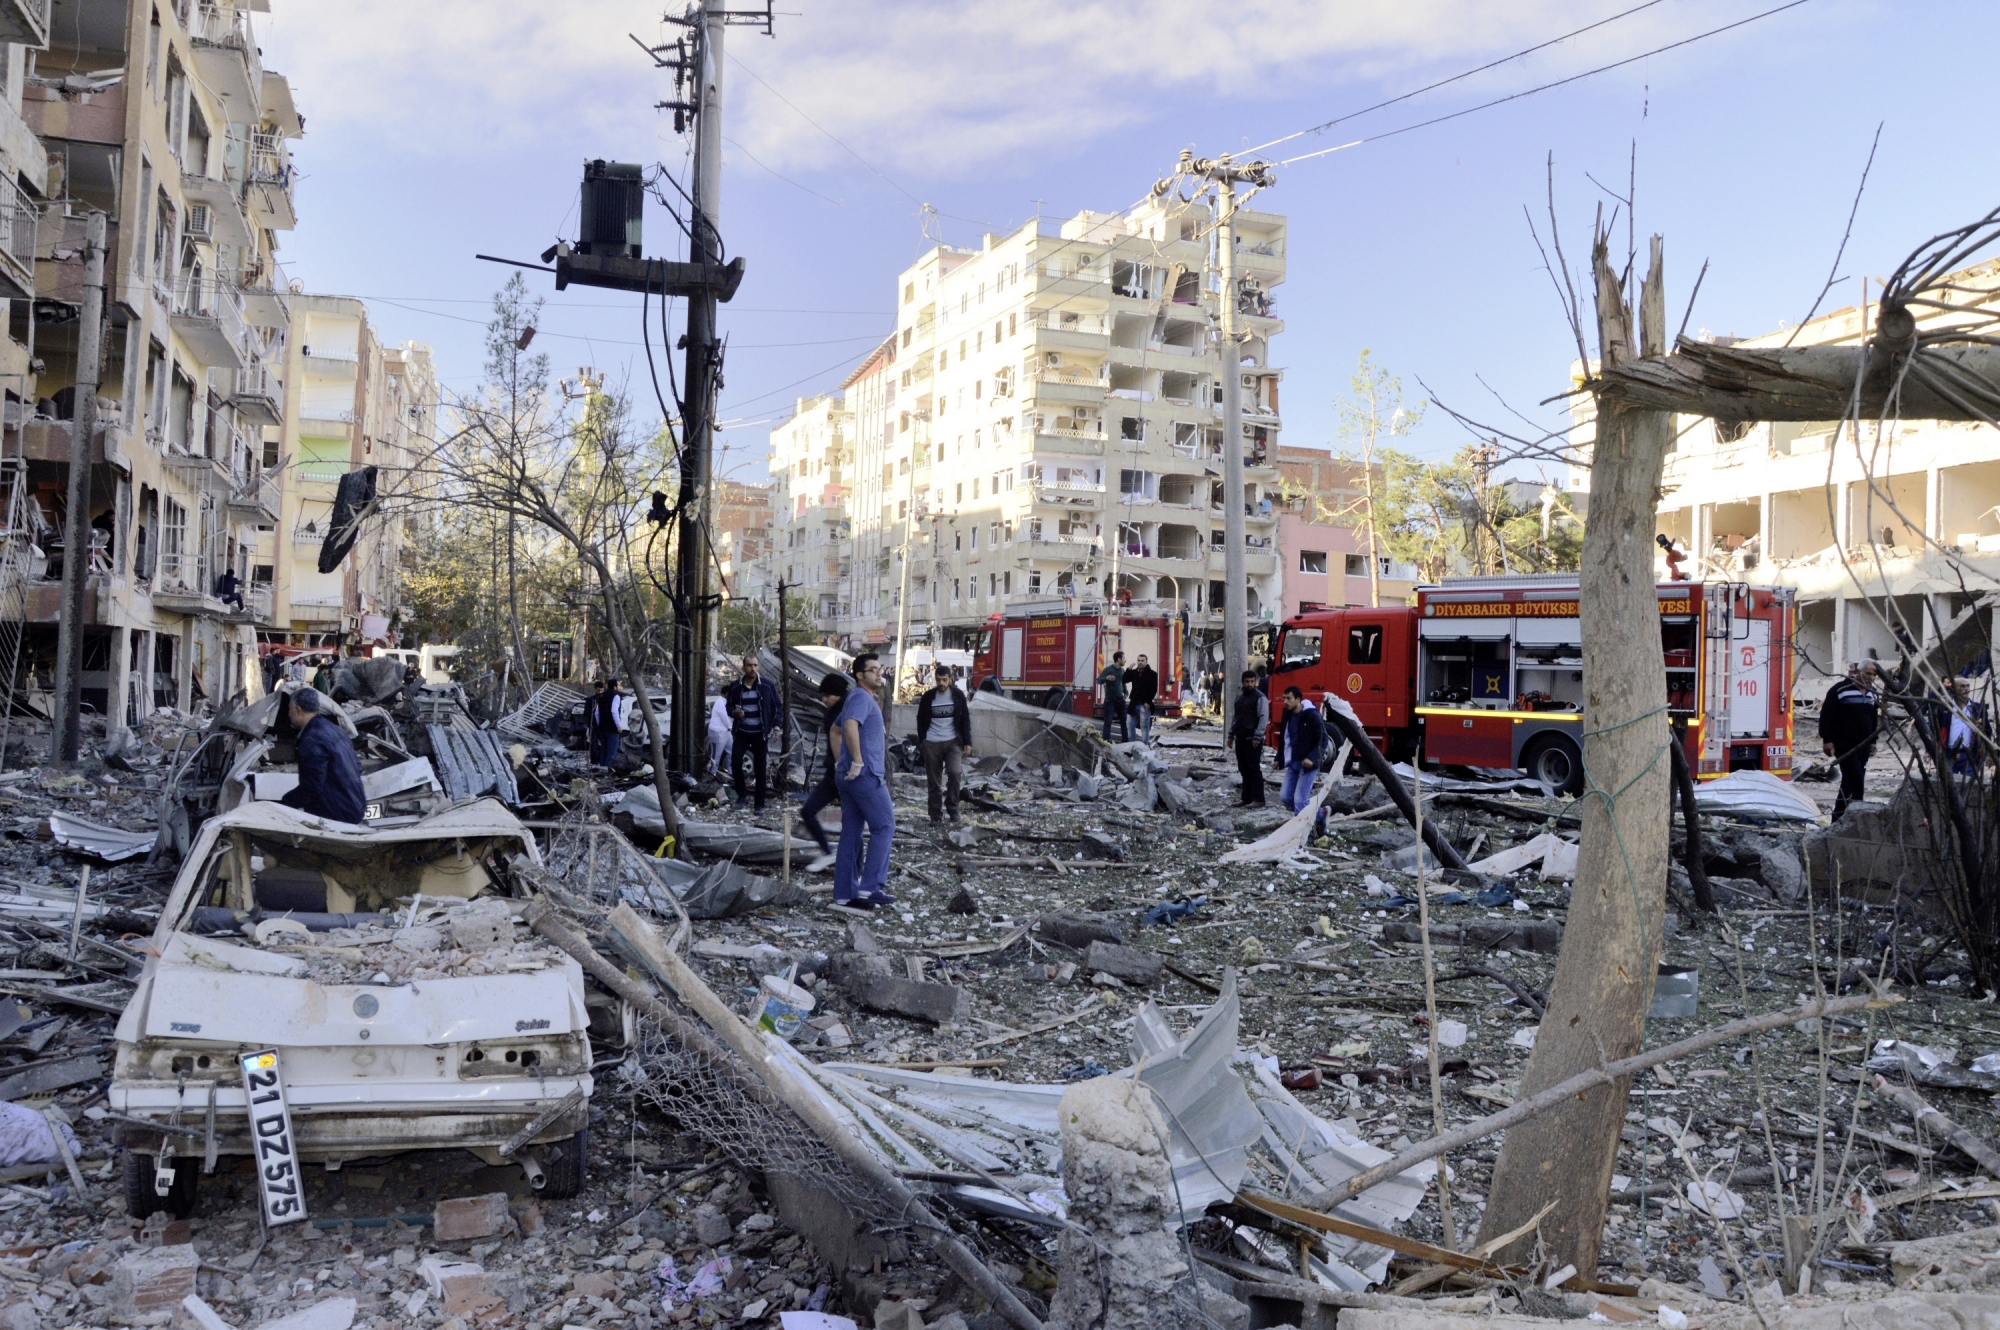 People watch the damage after an explosion in southeastern Turkish city of Diyarbakir, early Friday, Nov. 4, 2016. A large explosion hit the largest city in Turkey's mainly Kurdish southeast region on Friday, wounding several people, the state-run Anadolu Agency reported. The cause of the explosion was not immediately known but Hurriyet newspaper said it may have been caused by a car bomb. (IHA via AP) APTOPIX Turkey Explosion